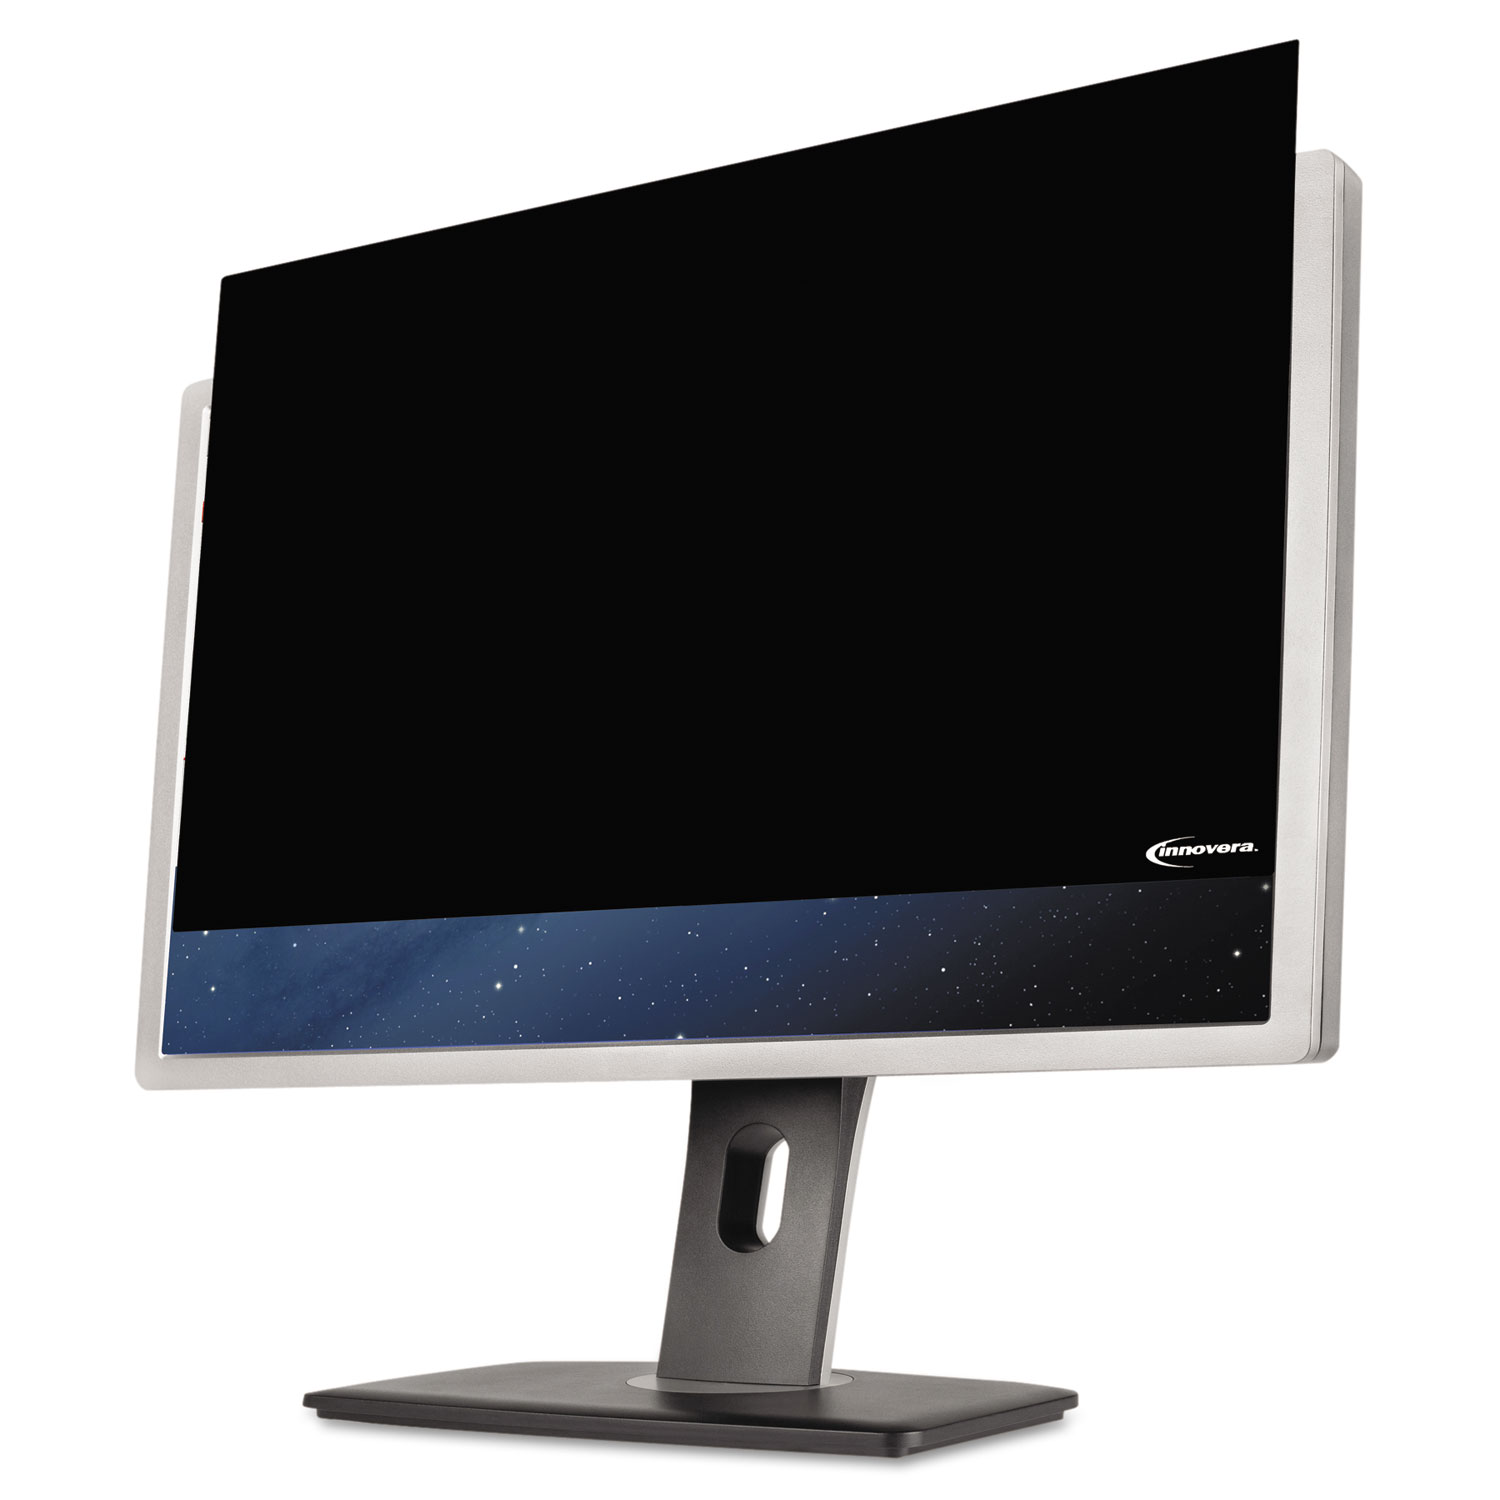 Blackout Privacy Filter for 18.5 Widescreen LCD Monitor, 16:9 Aspect Ratio